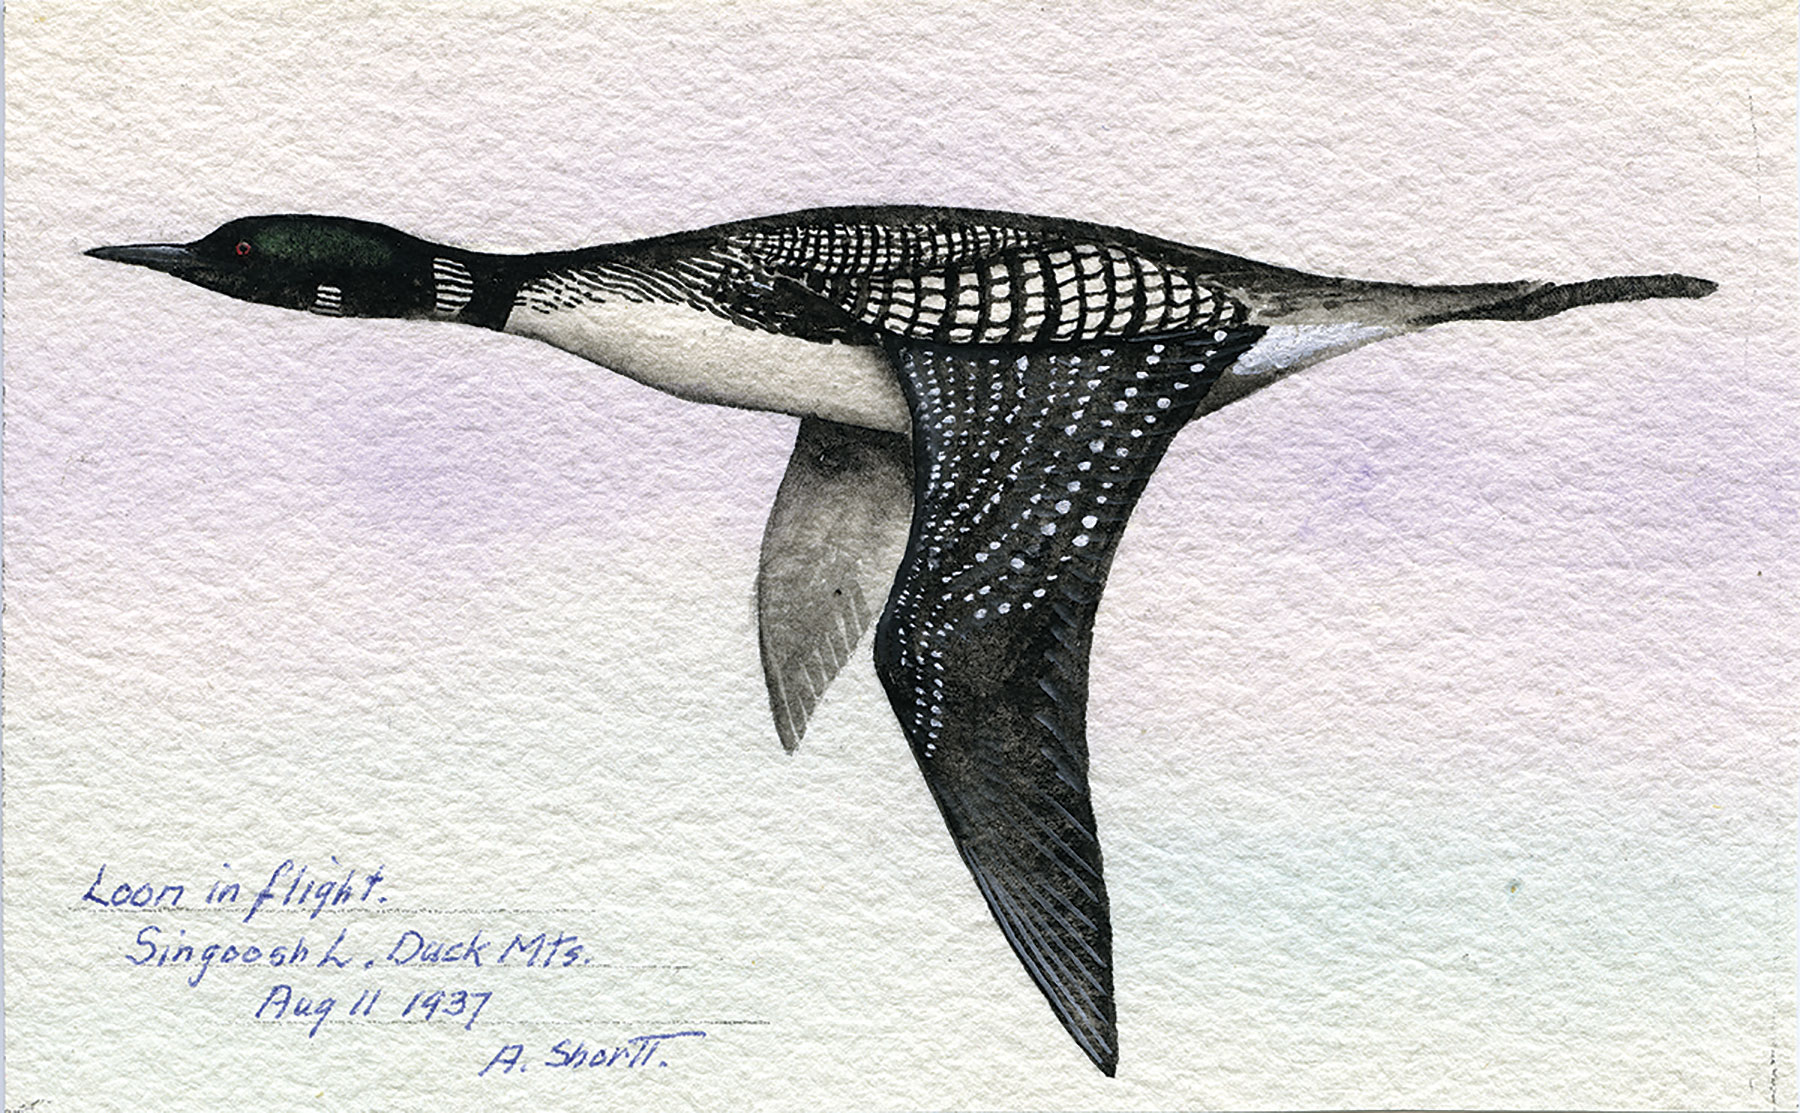 An illustration of a loon.